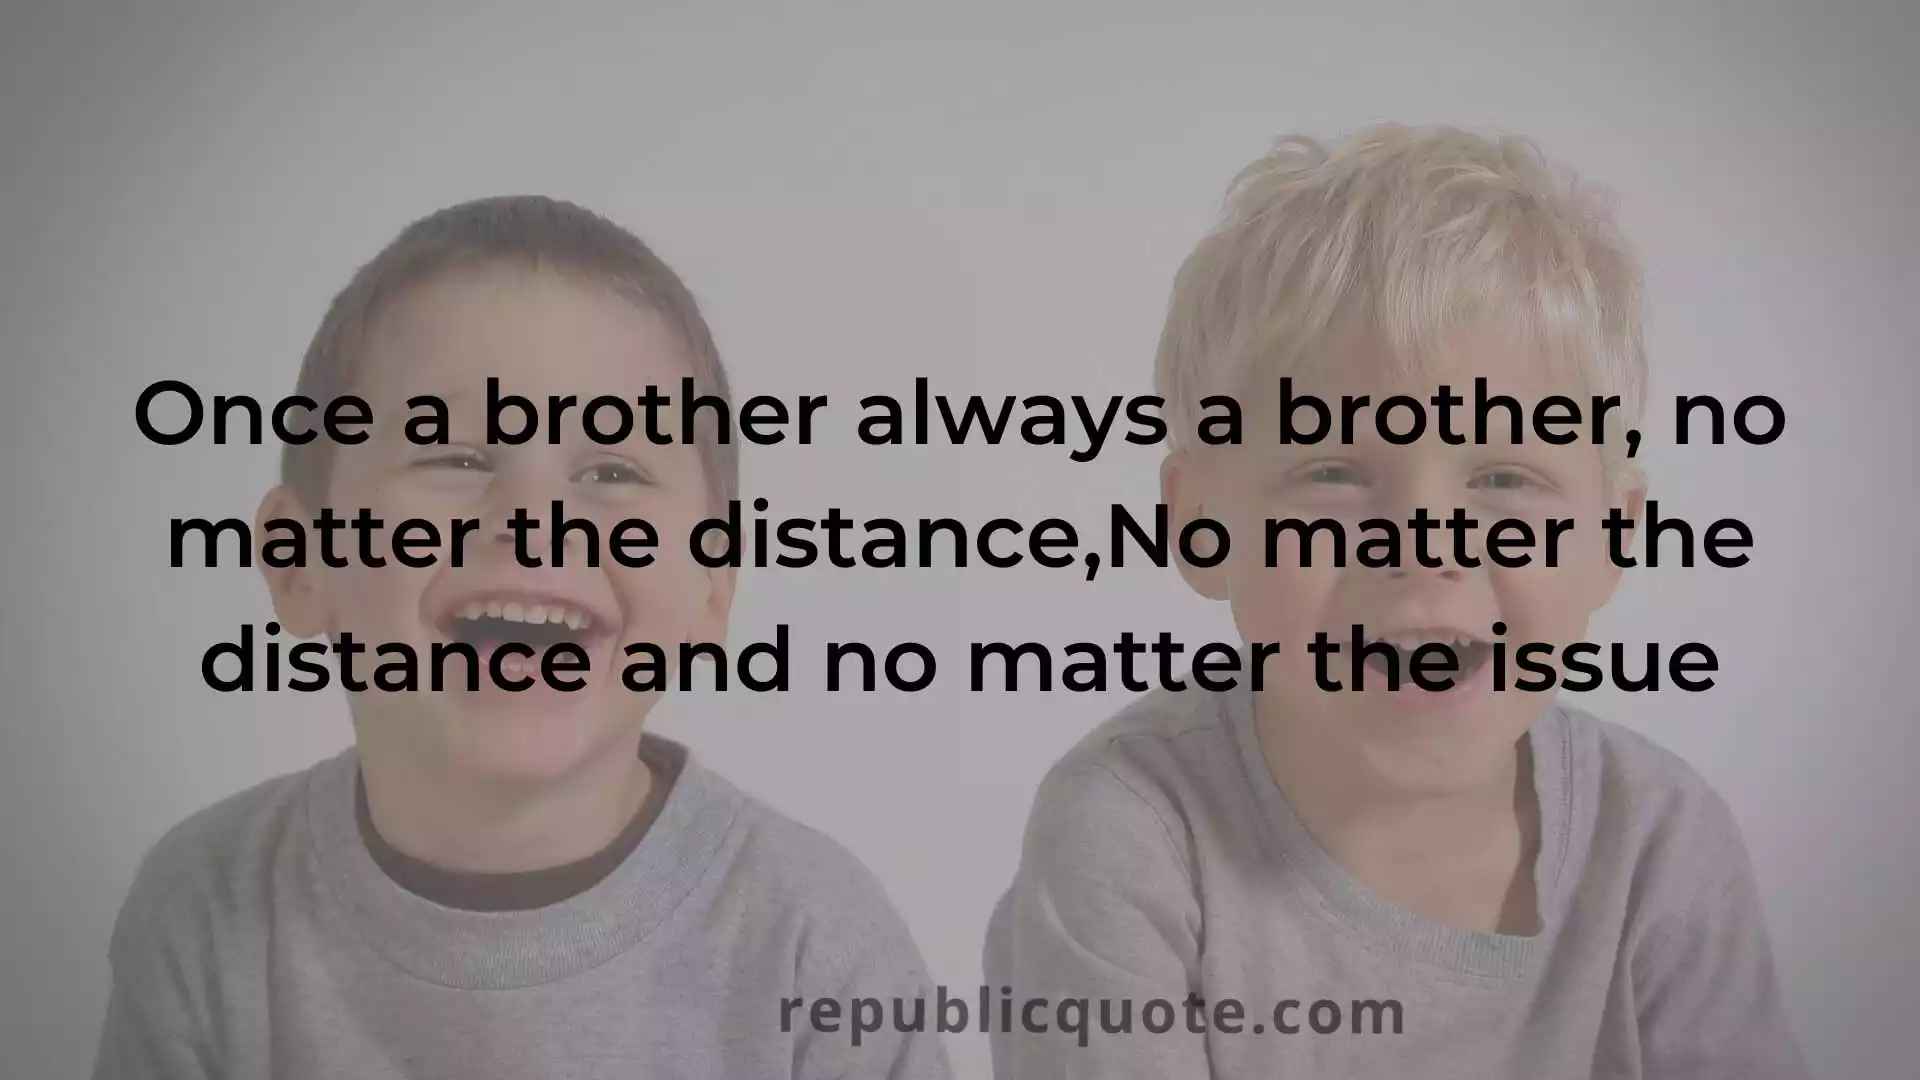 Brother from Another Mother Quotes